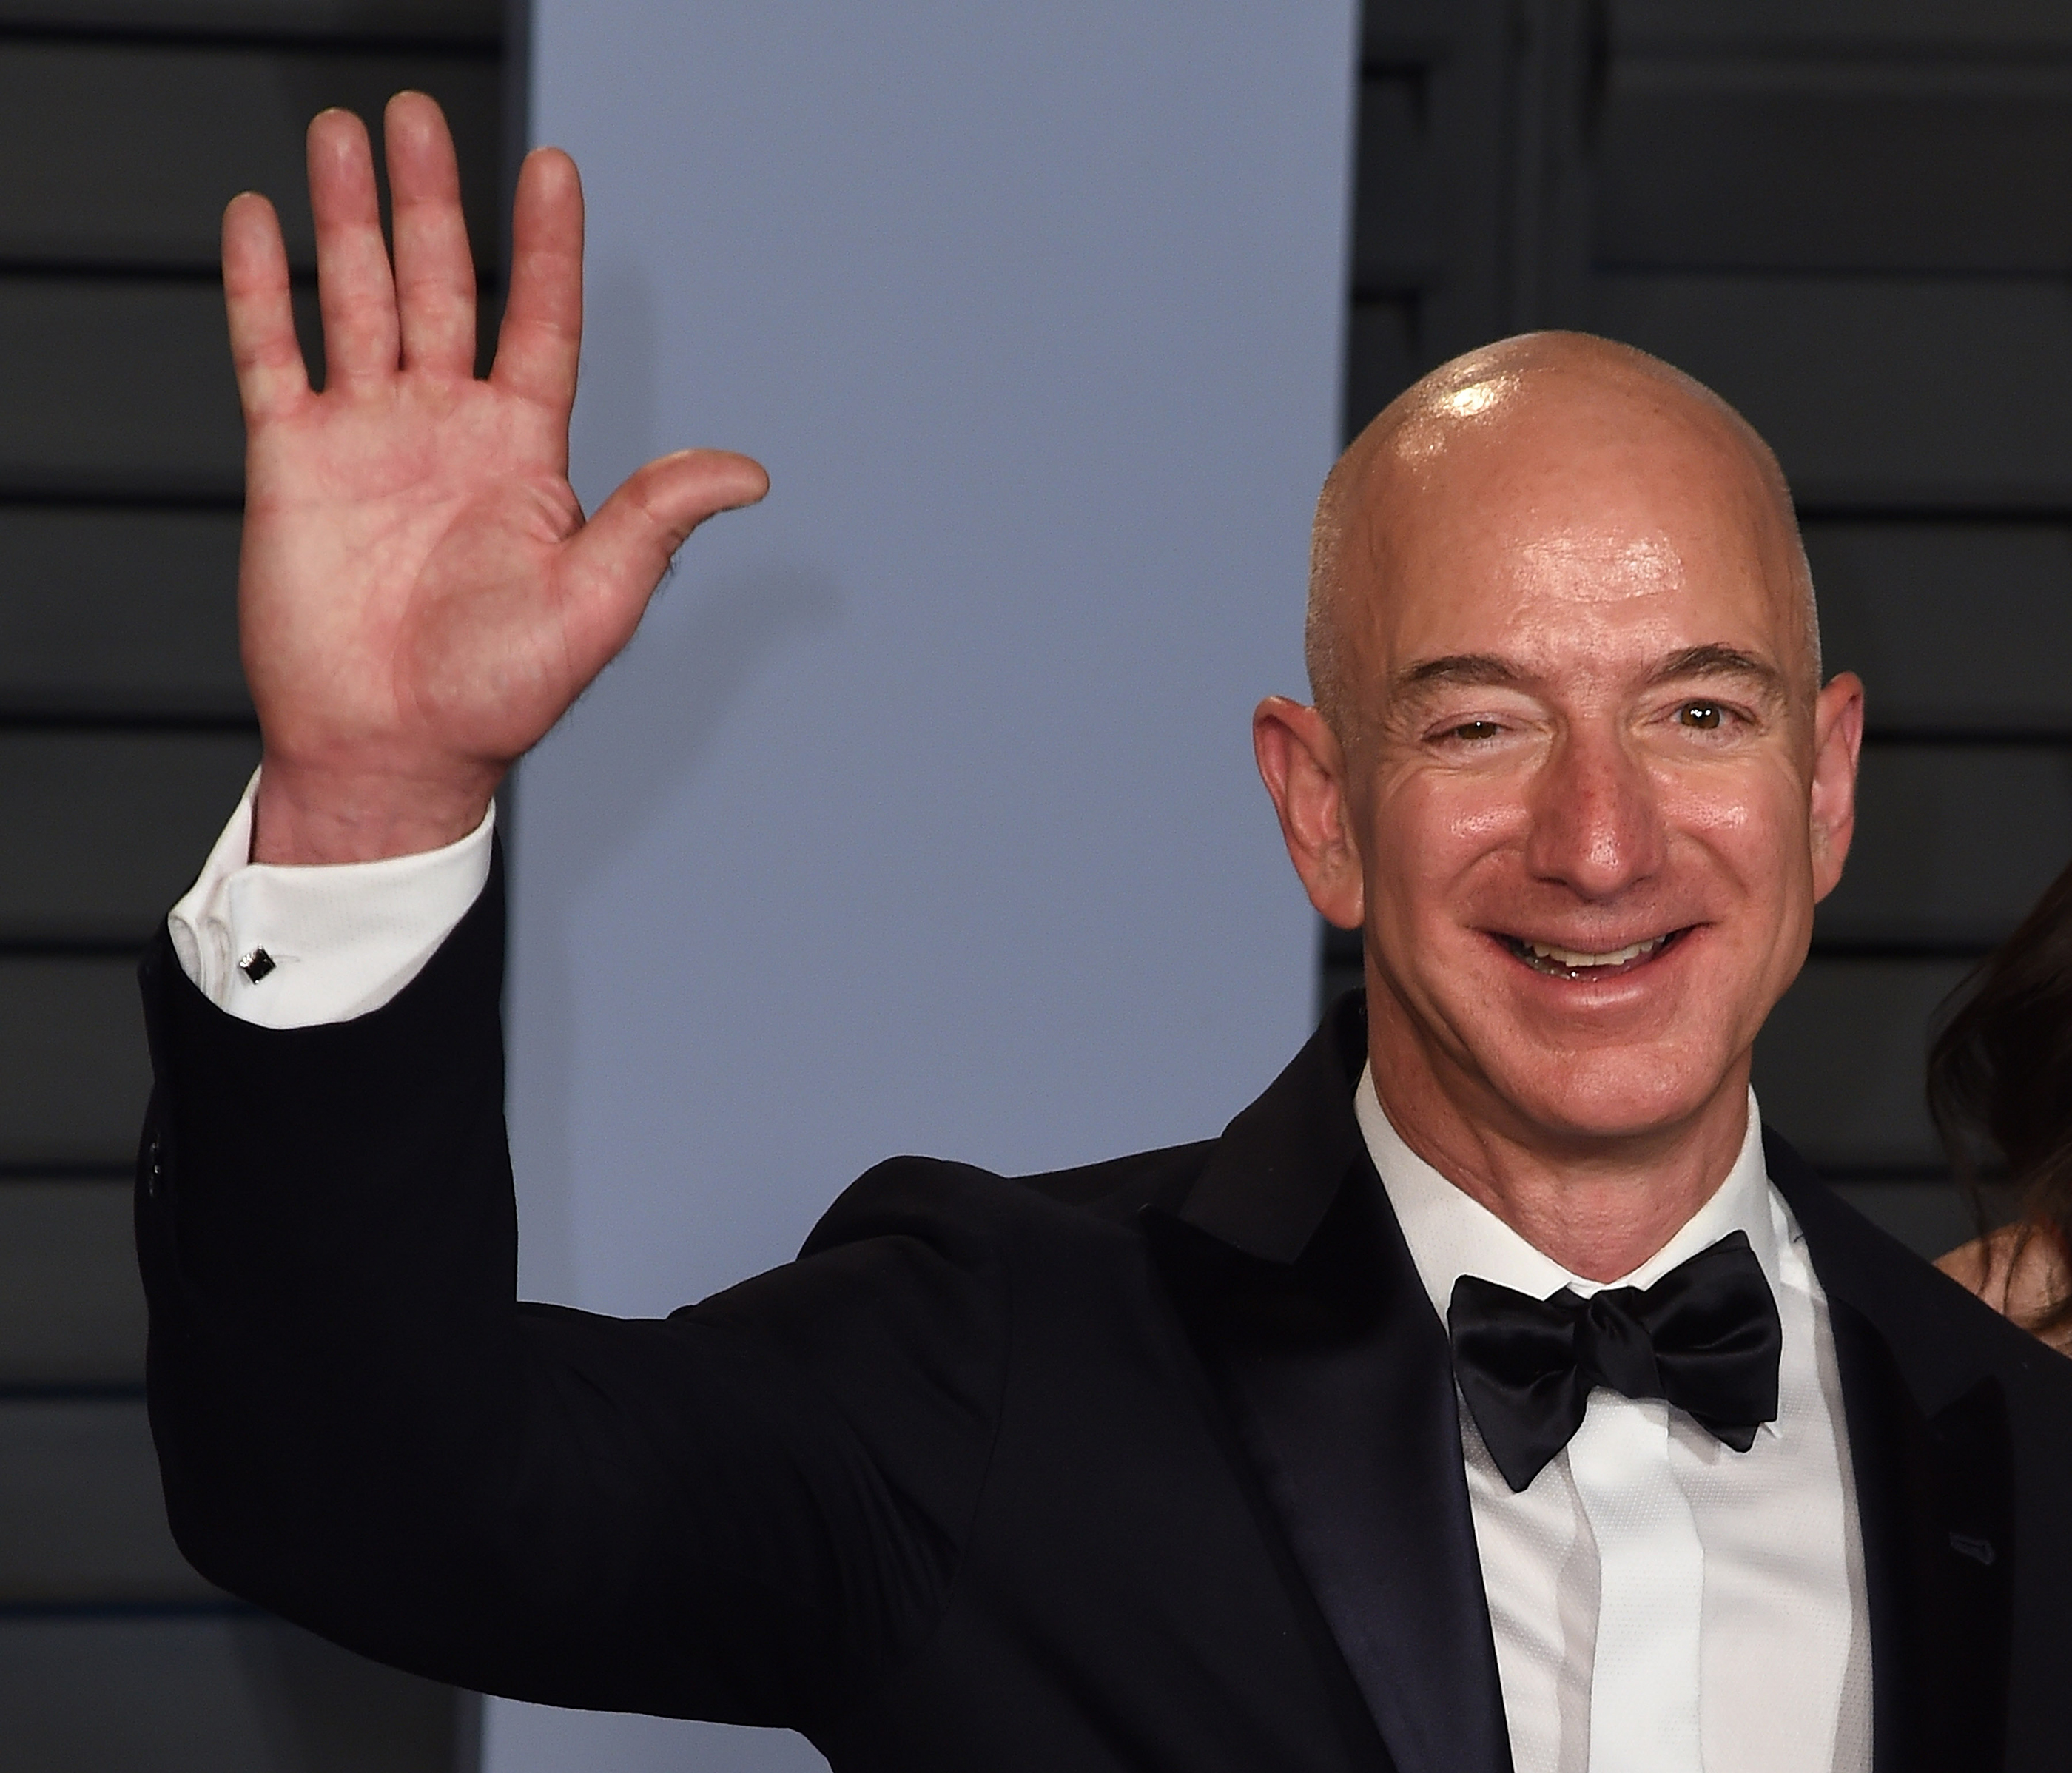 The Median Amazon Employee's Salary Is $28,000. Jeff Bezos Makes More Than That in 10 Seconds